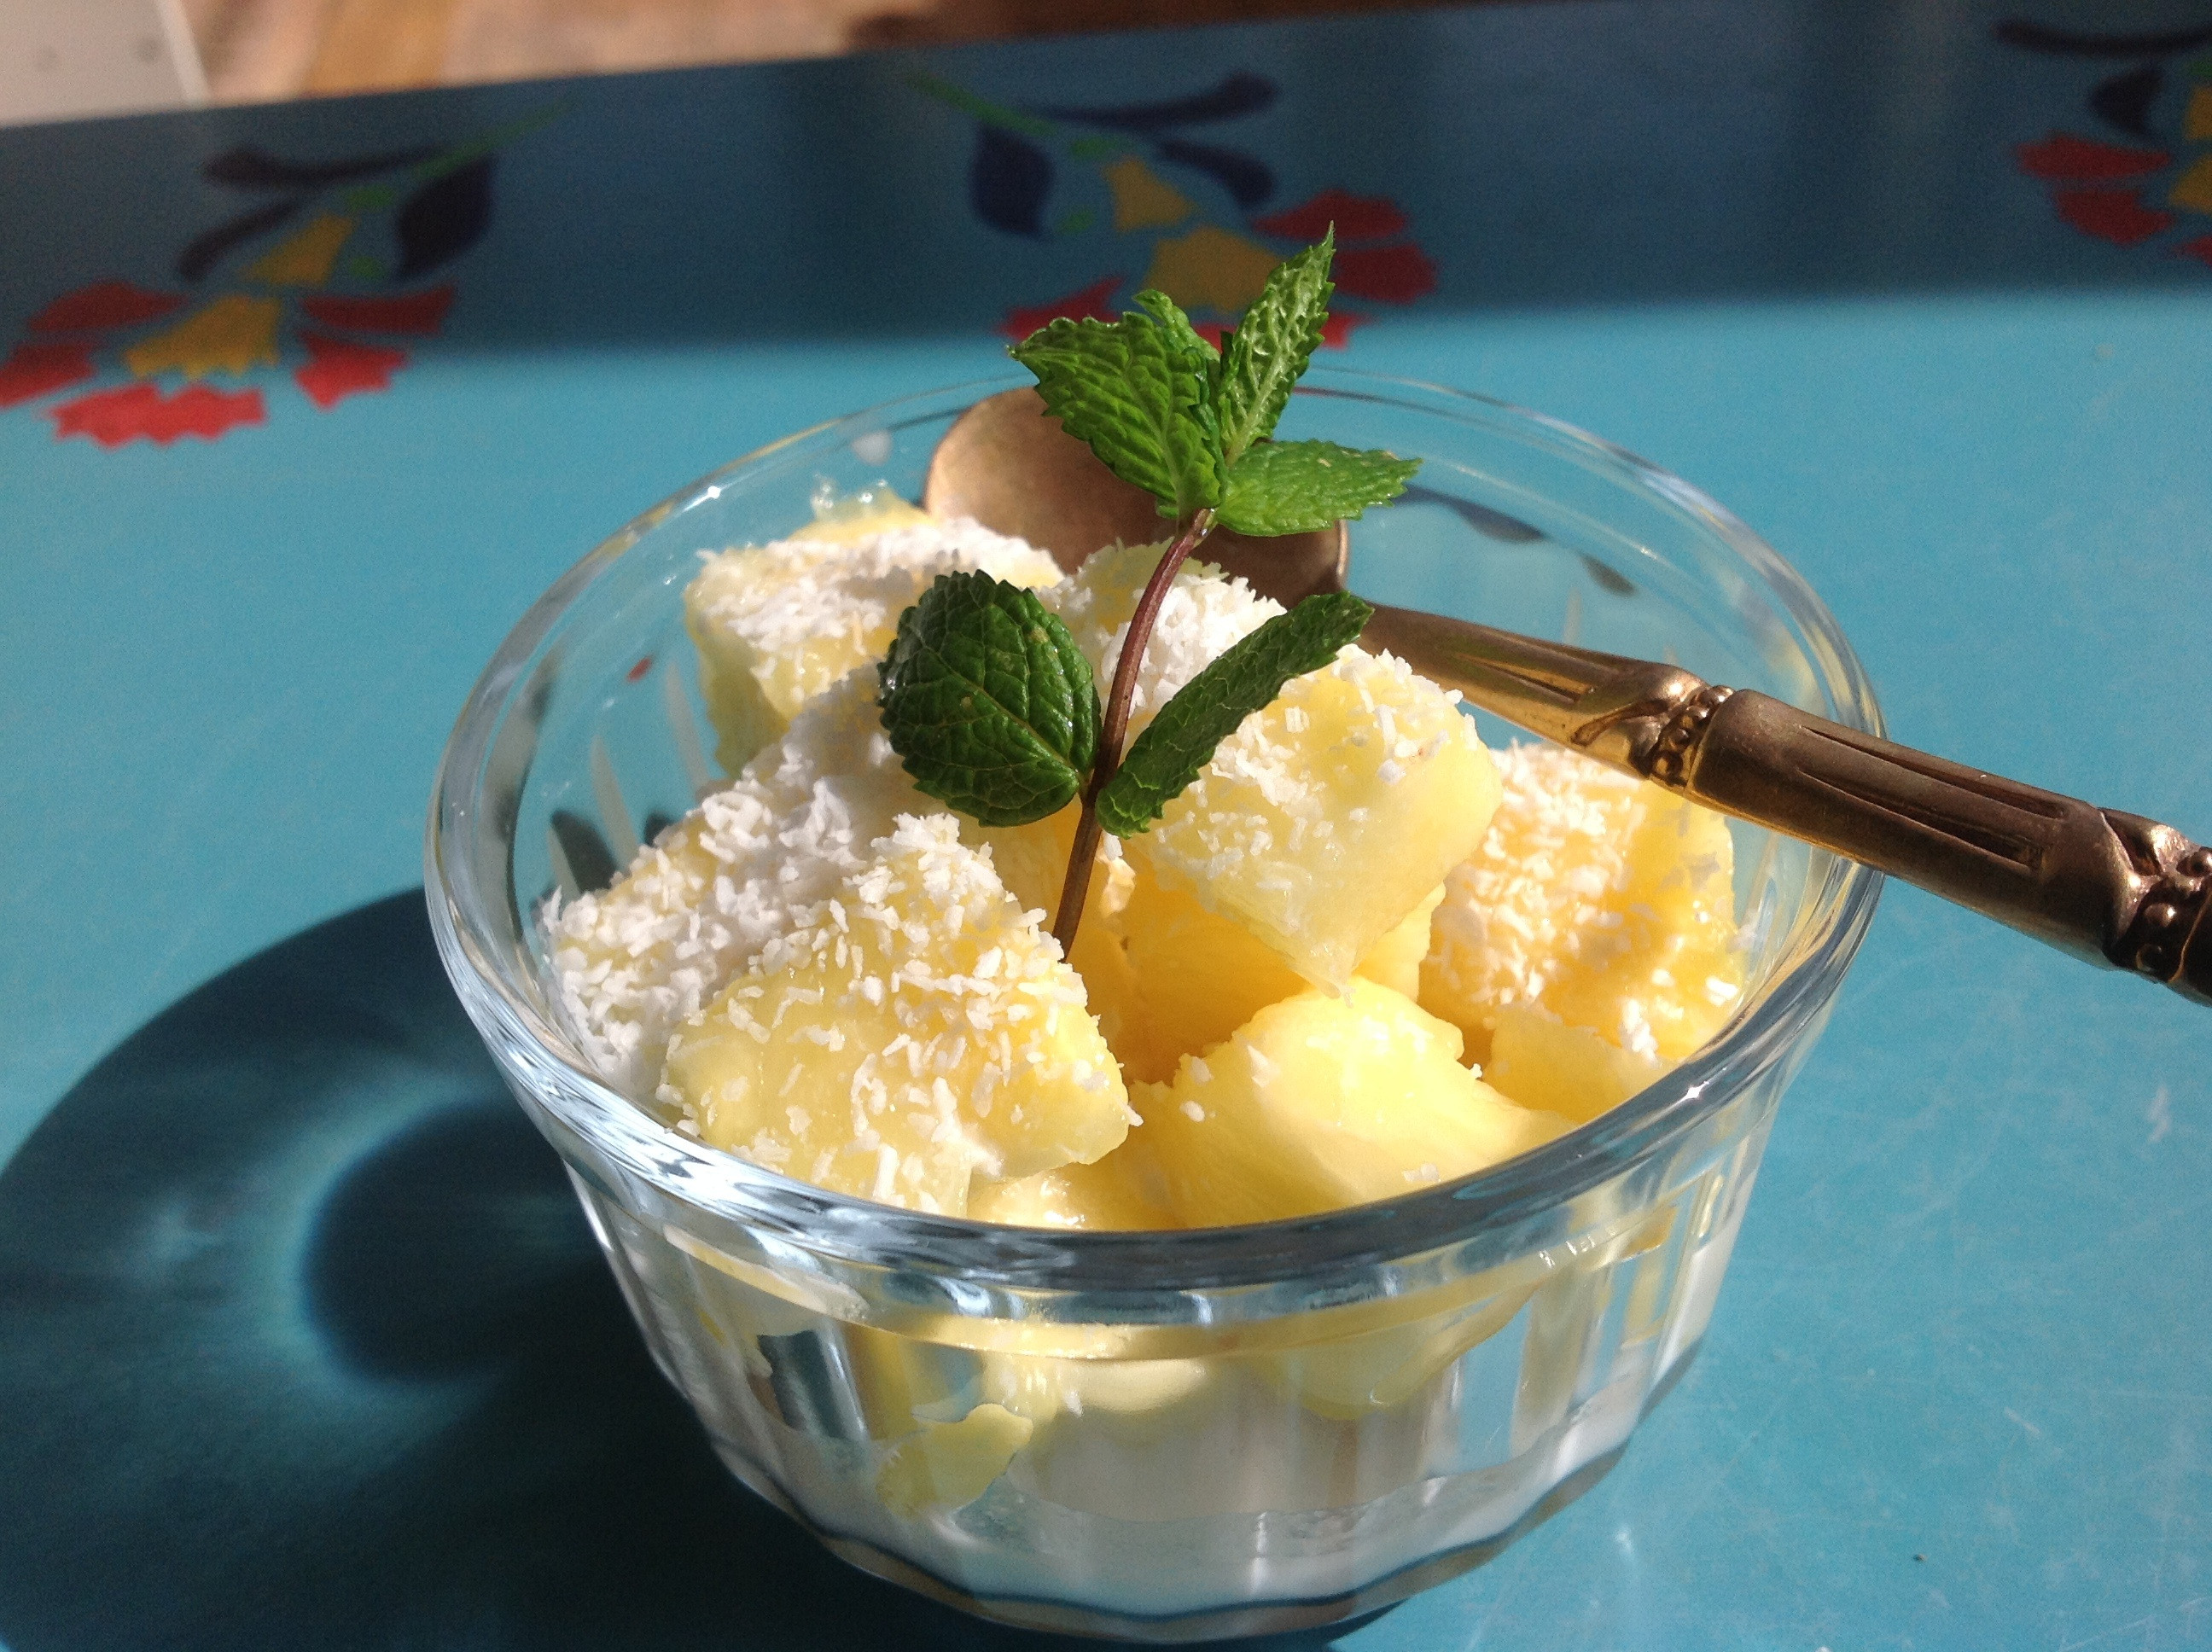 Pineapple Desserts Healthy
 Easy Guadeloupe Inspired Pineapple and Coconut Dessert Recipe